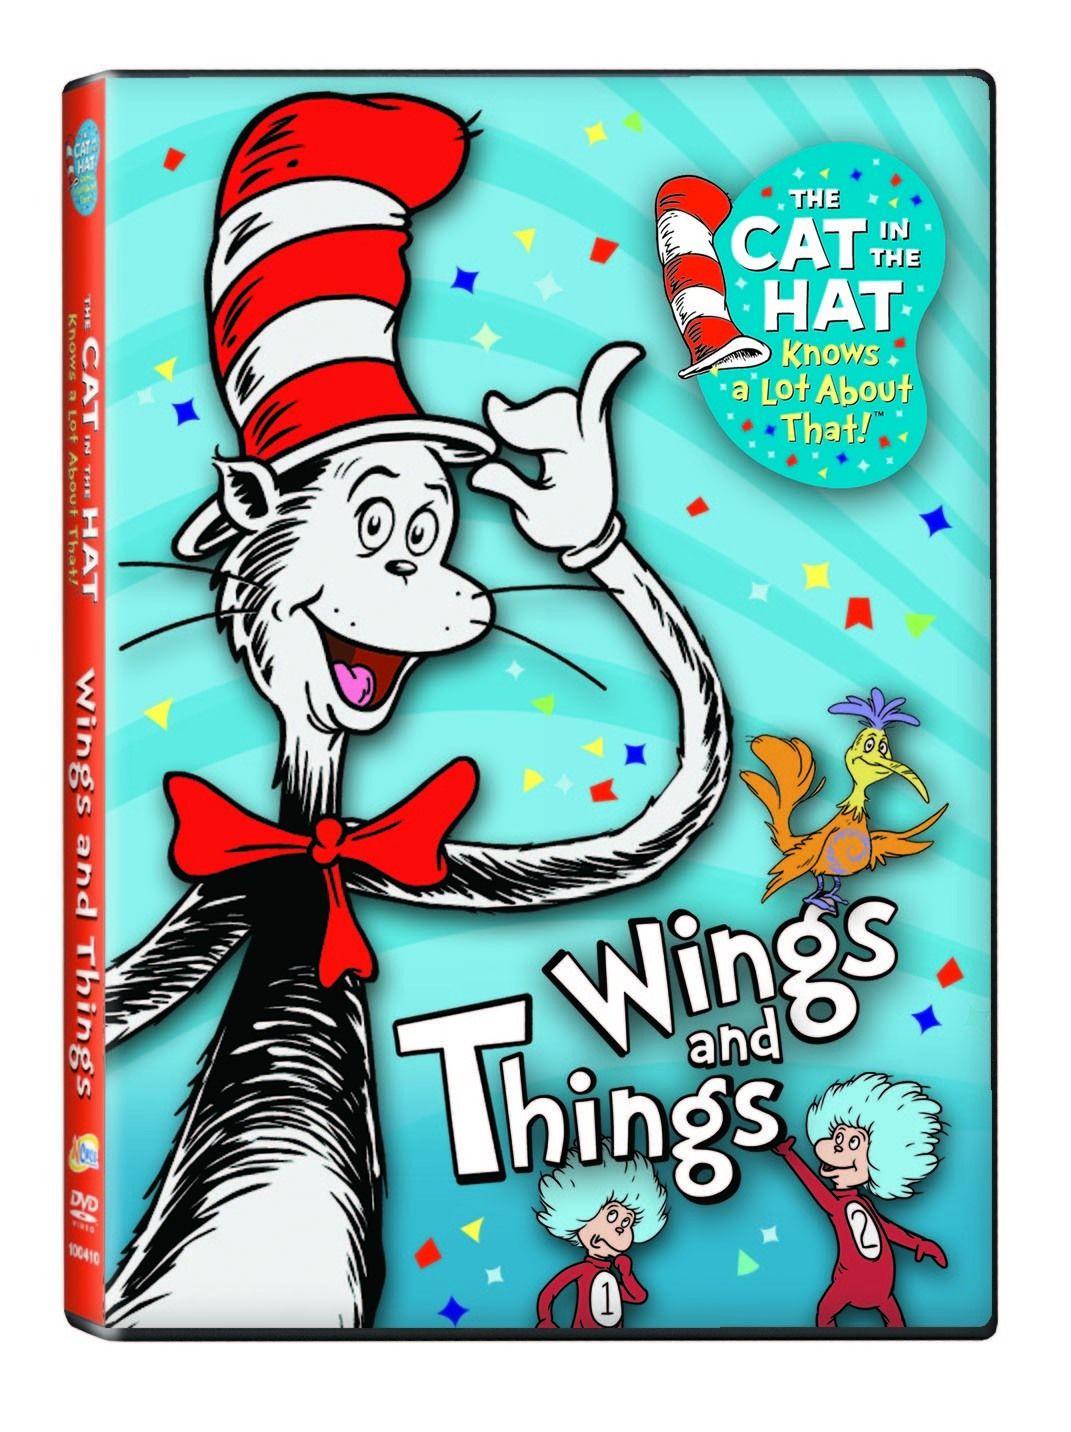 The Cat in the Hat Knows a Lot About That image The Cat in